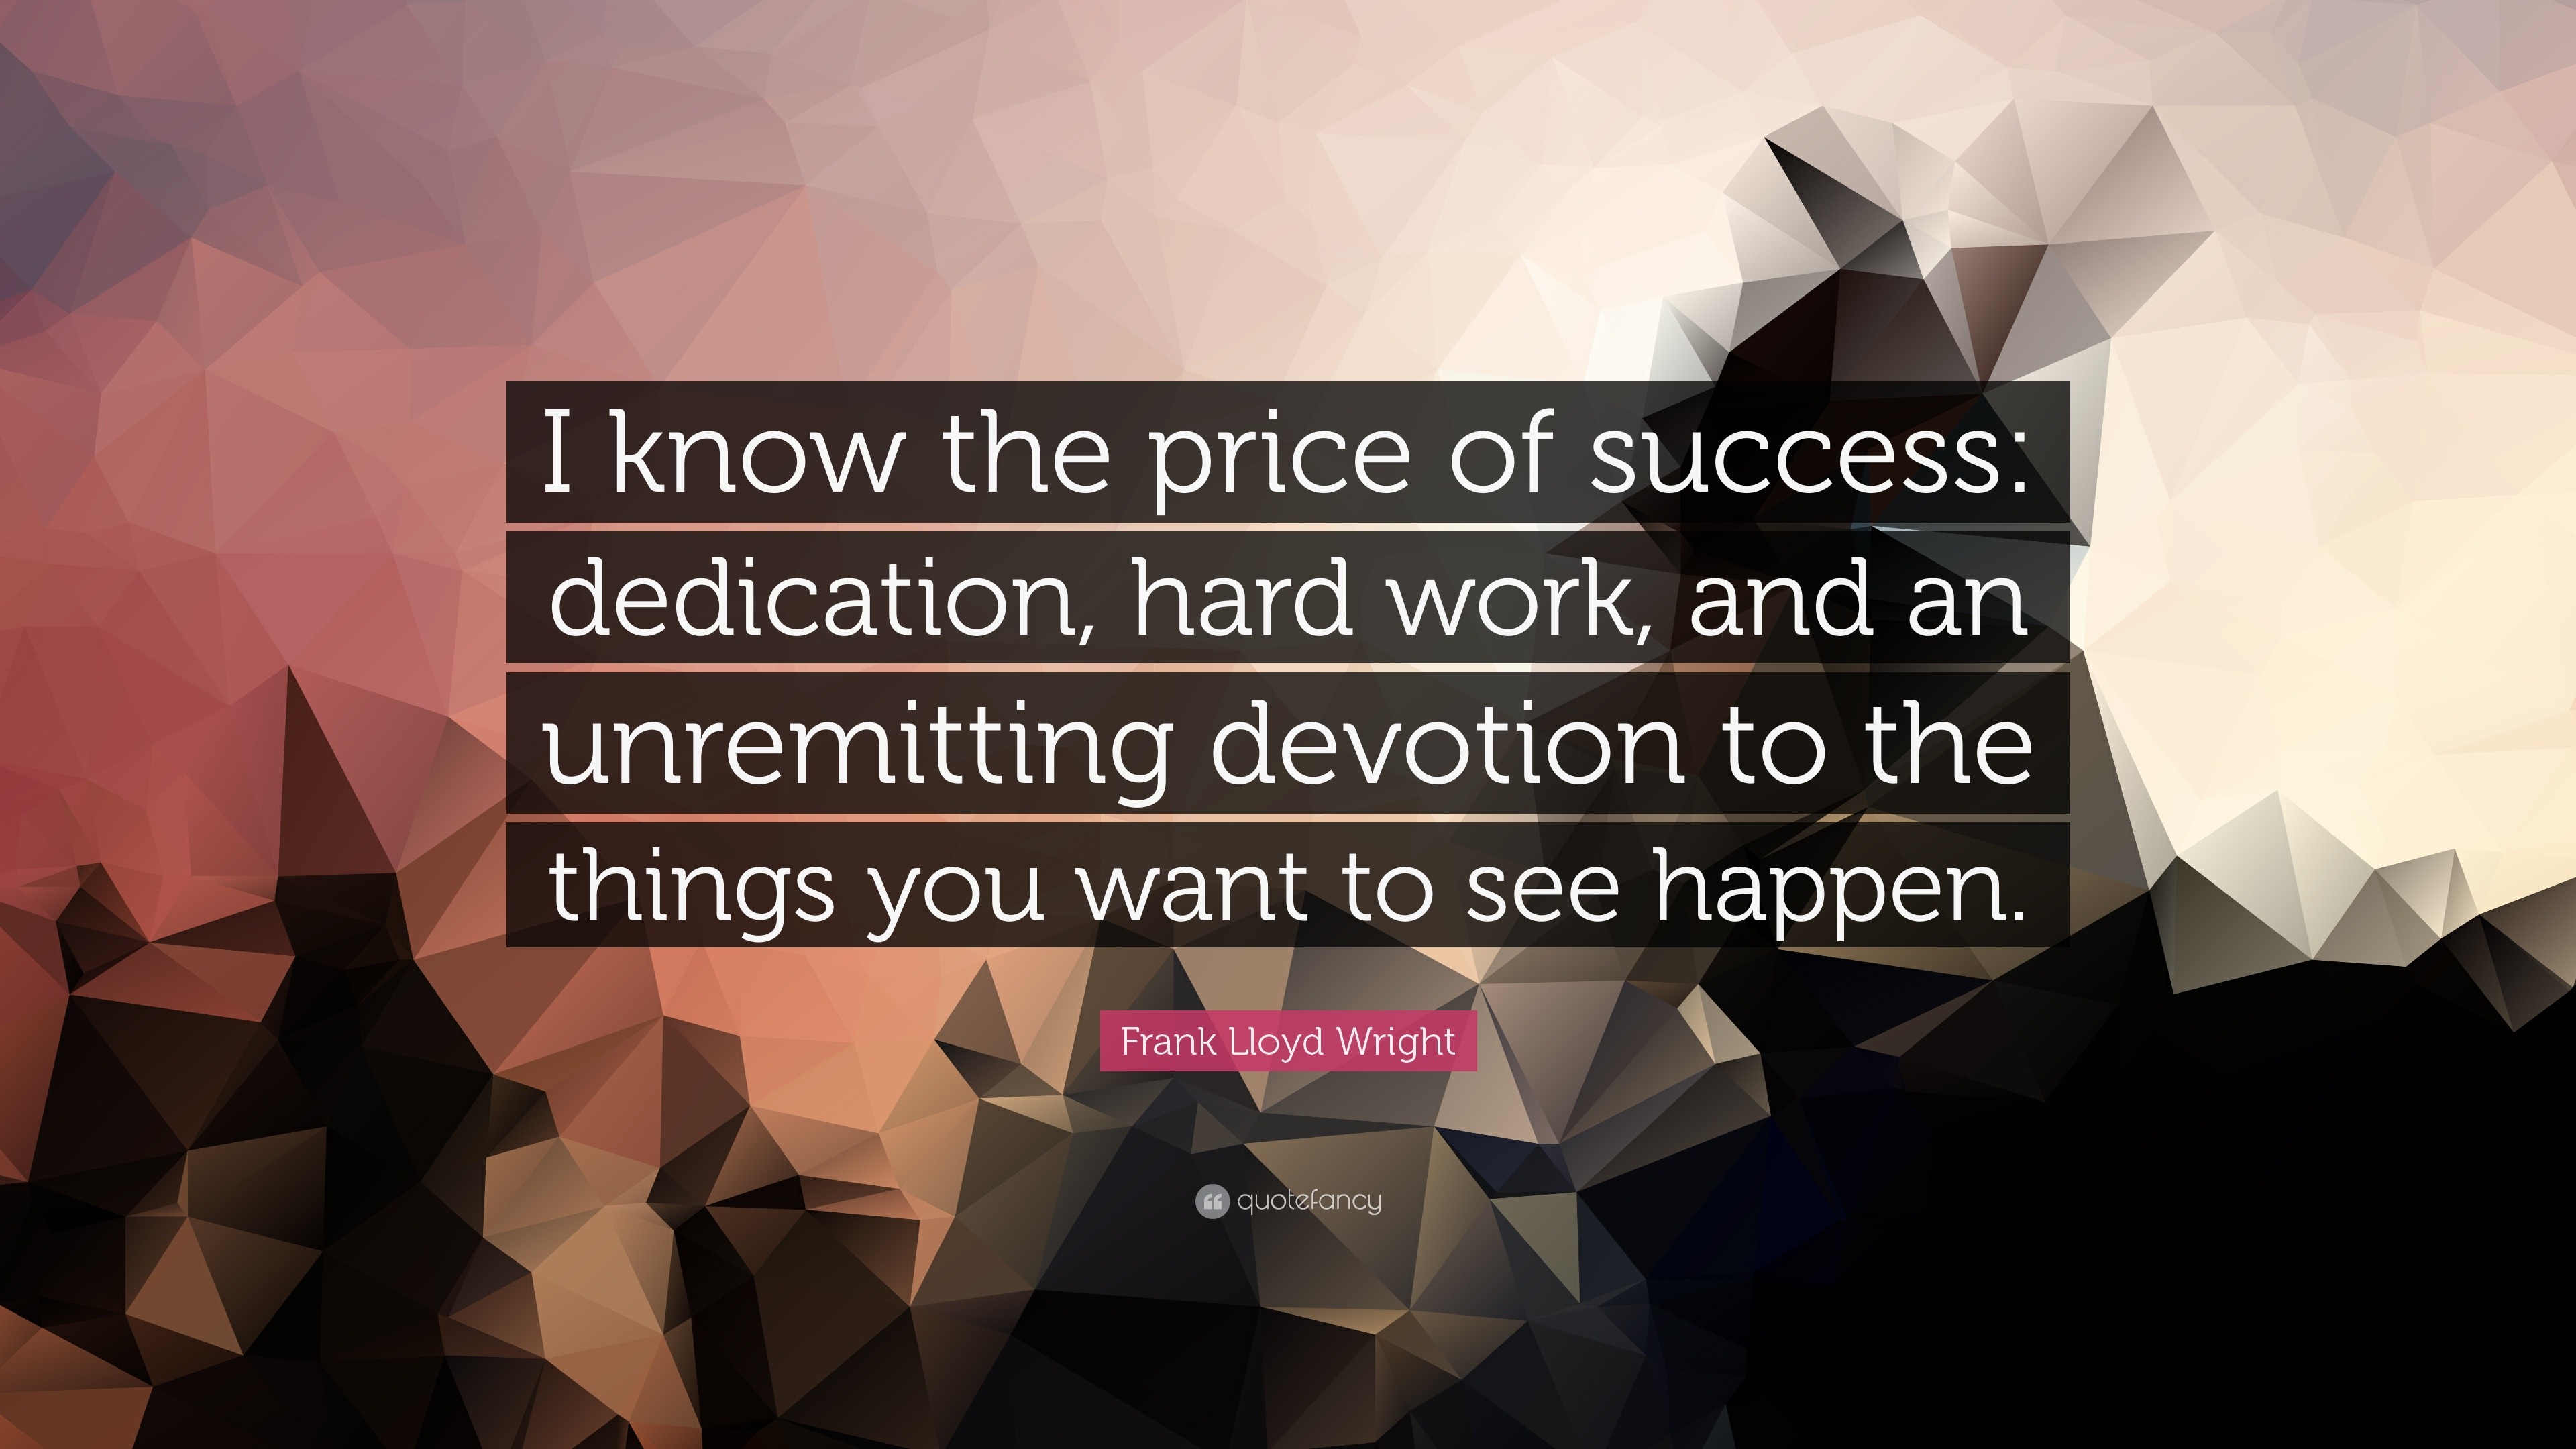 Frank Lloyd Wright Quote: “I know the price of success: dedication